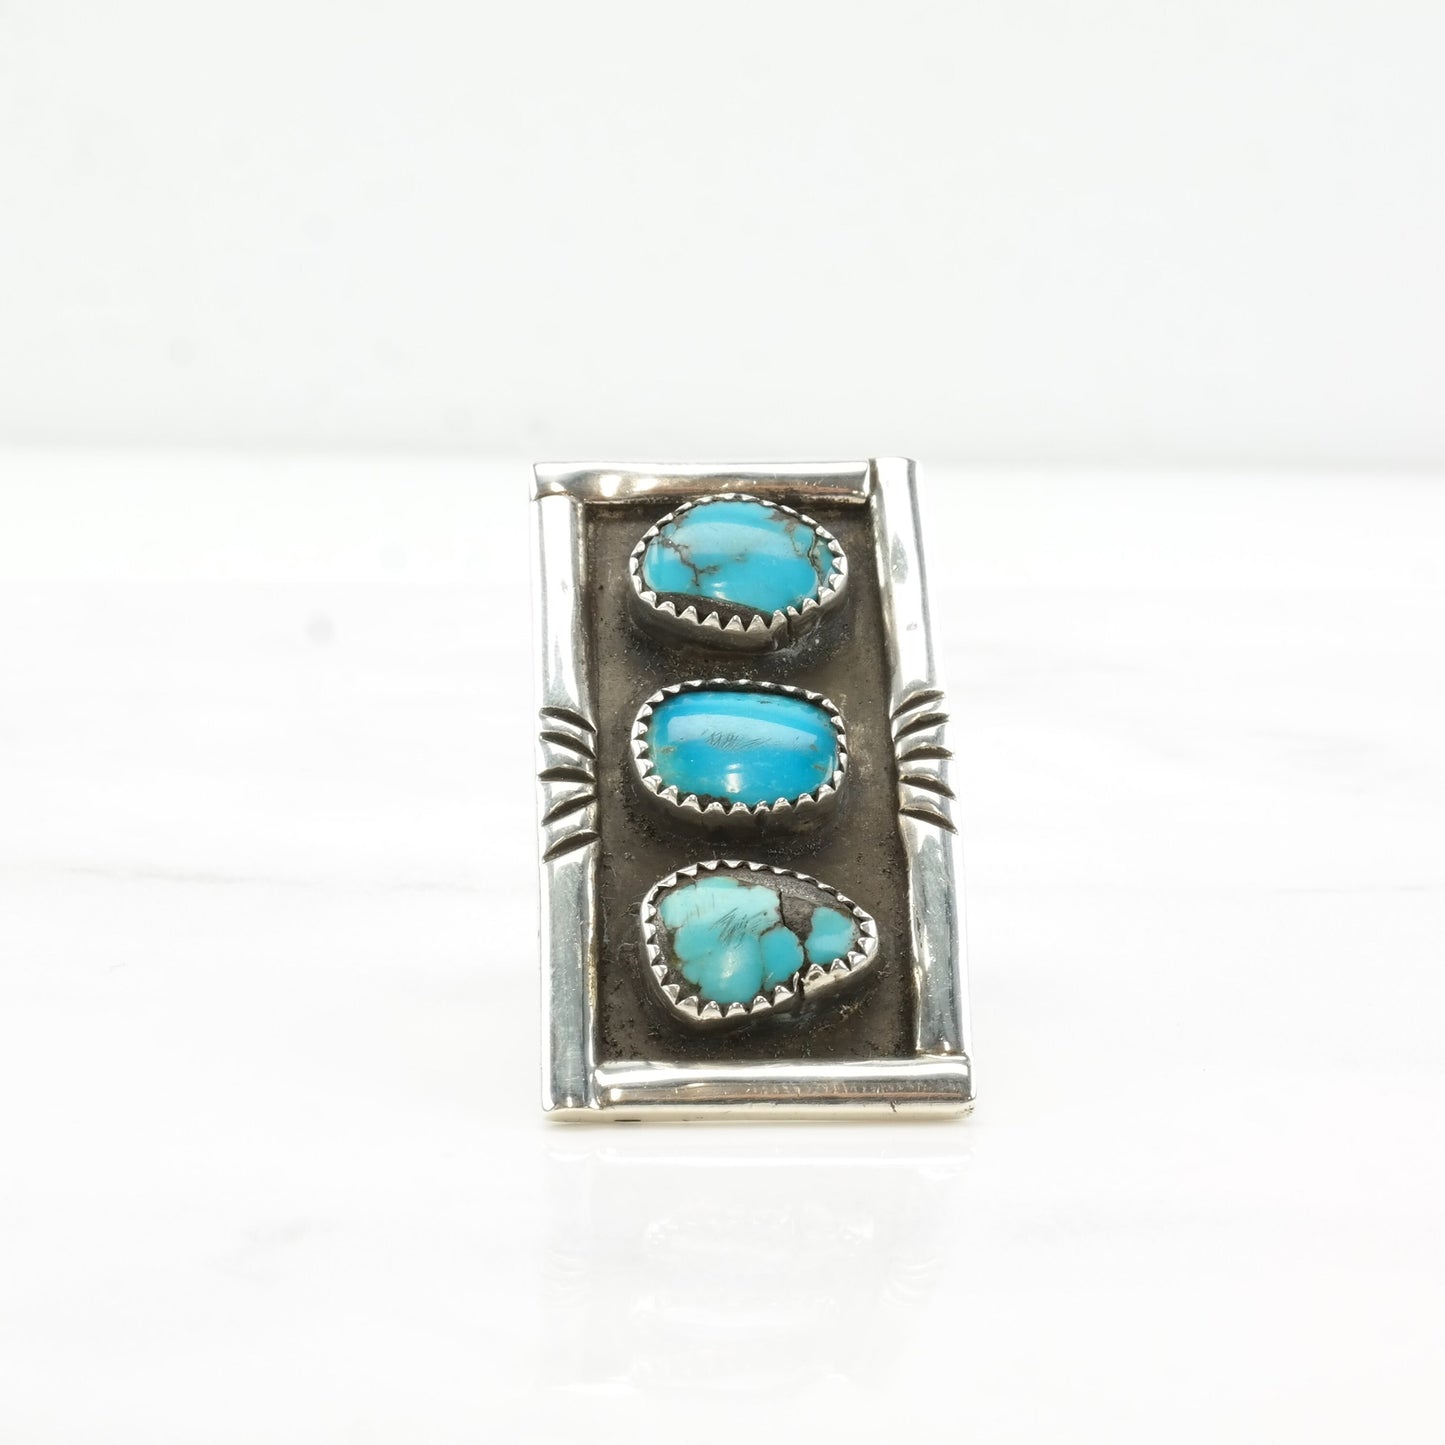 Vintage Native American Silver Ring Turquoise Three Stone Shadowbox Long Rectangle Sterling Size 5 1/4